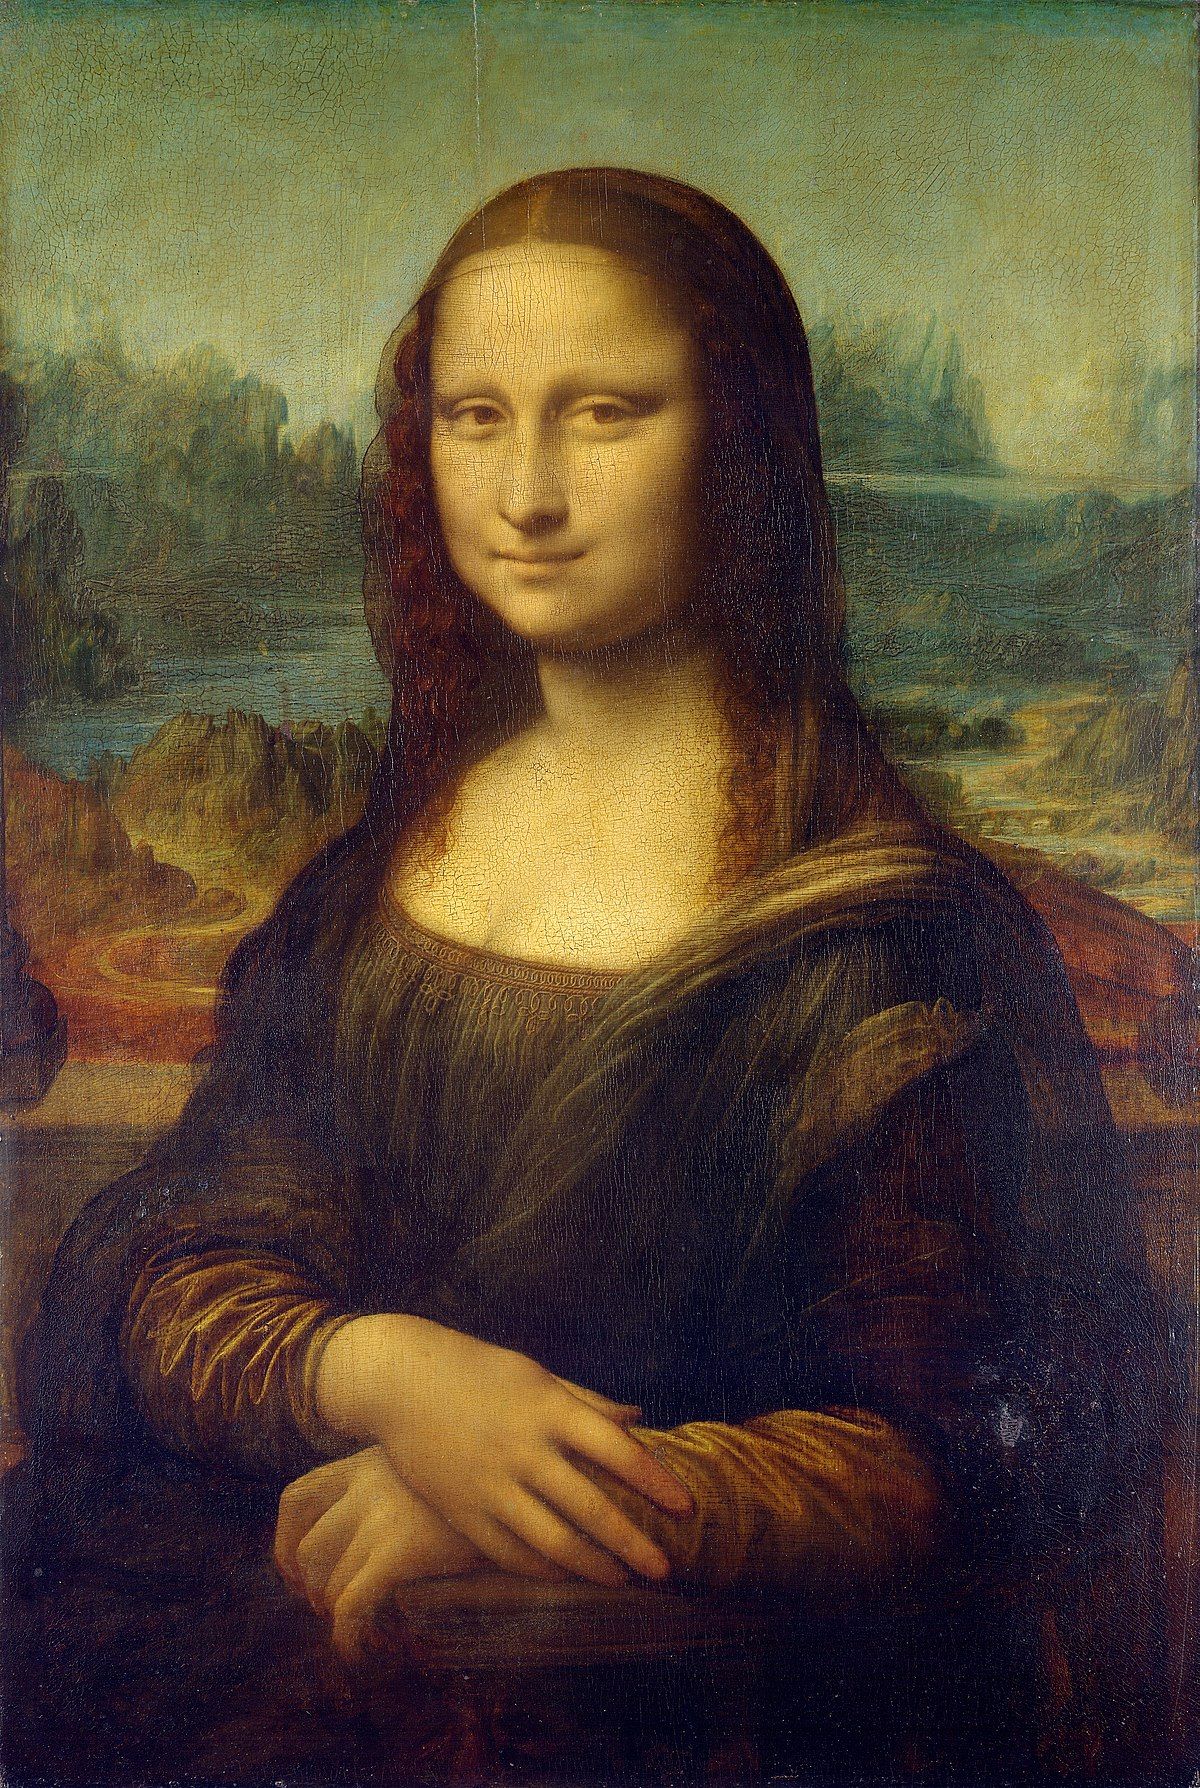 Da Vinci's Mona Lisa was inspiration for a painting in Among Us